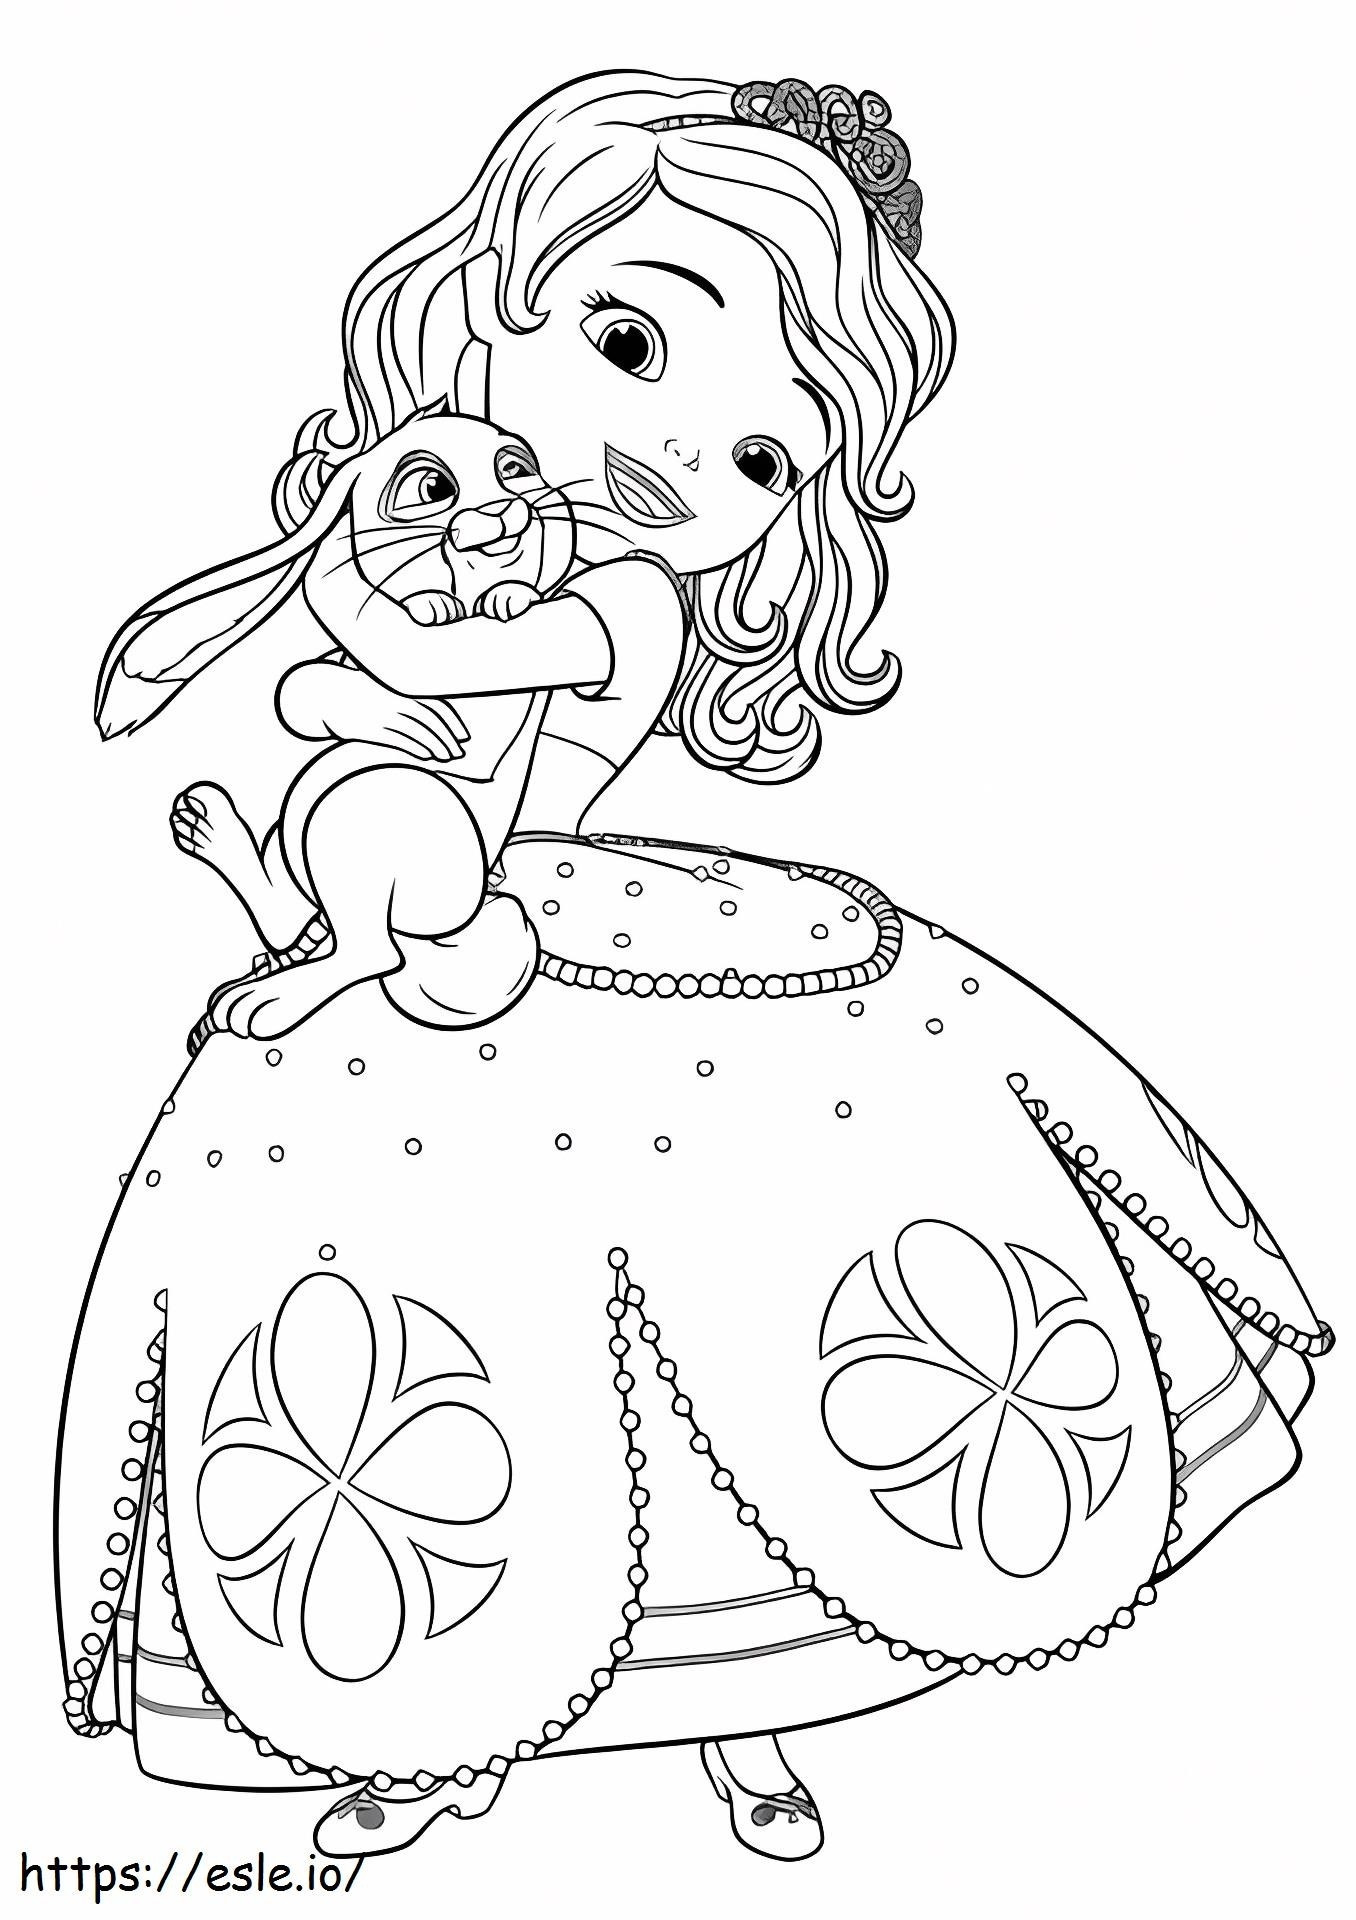 Sofia And Clovera4 coloring page